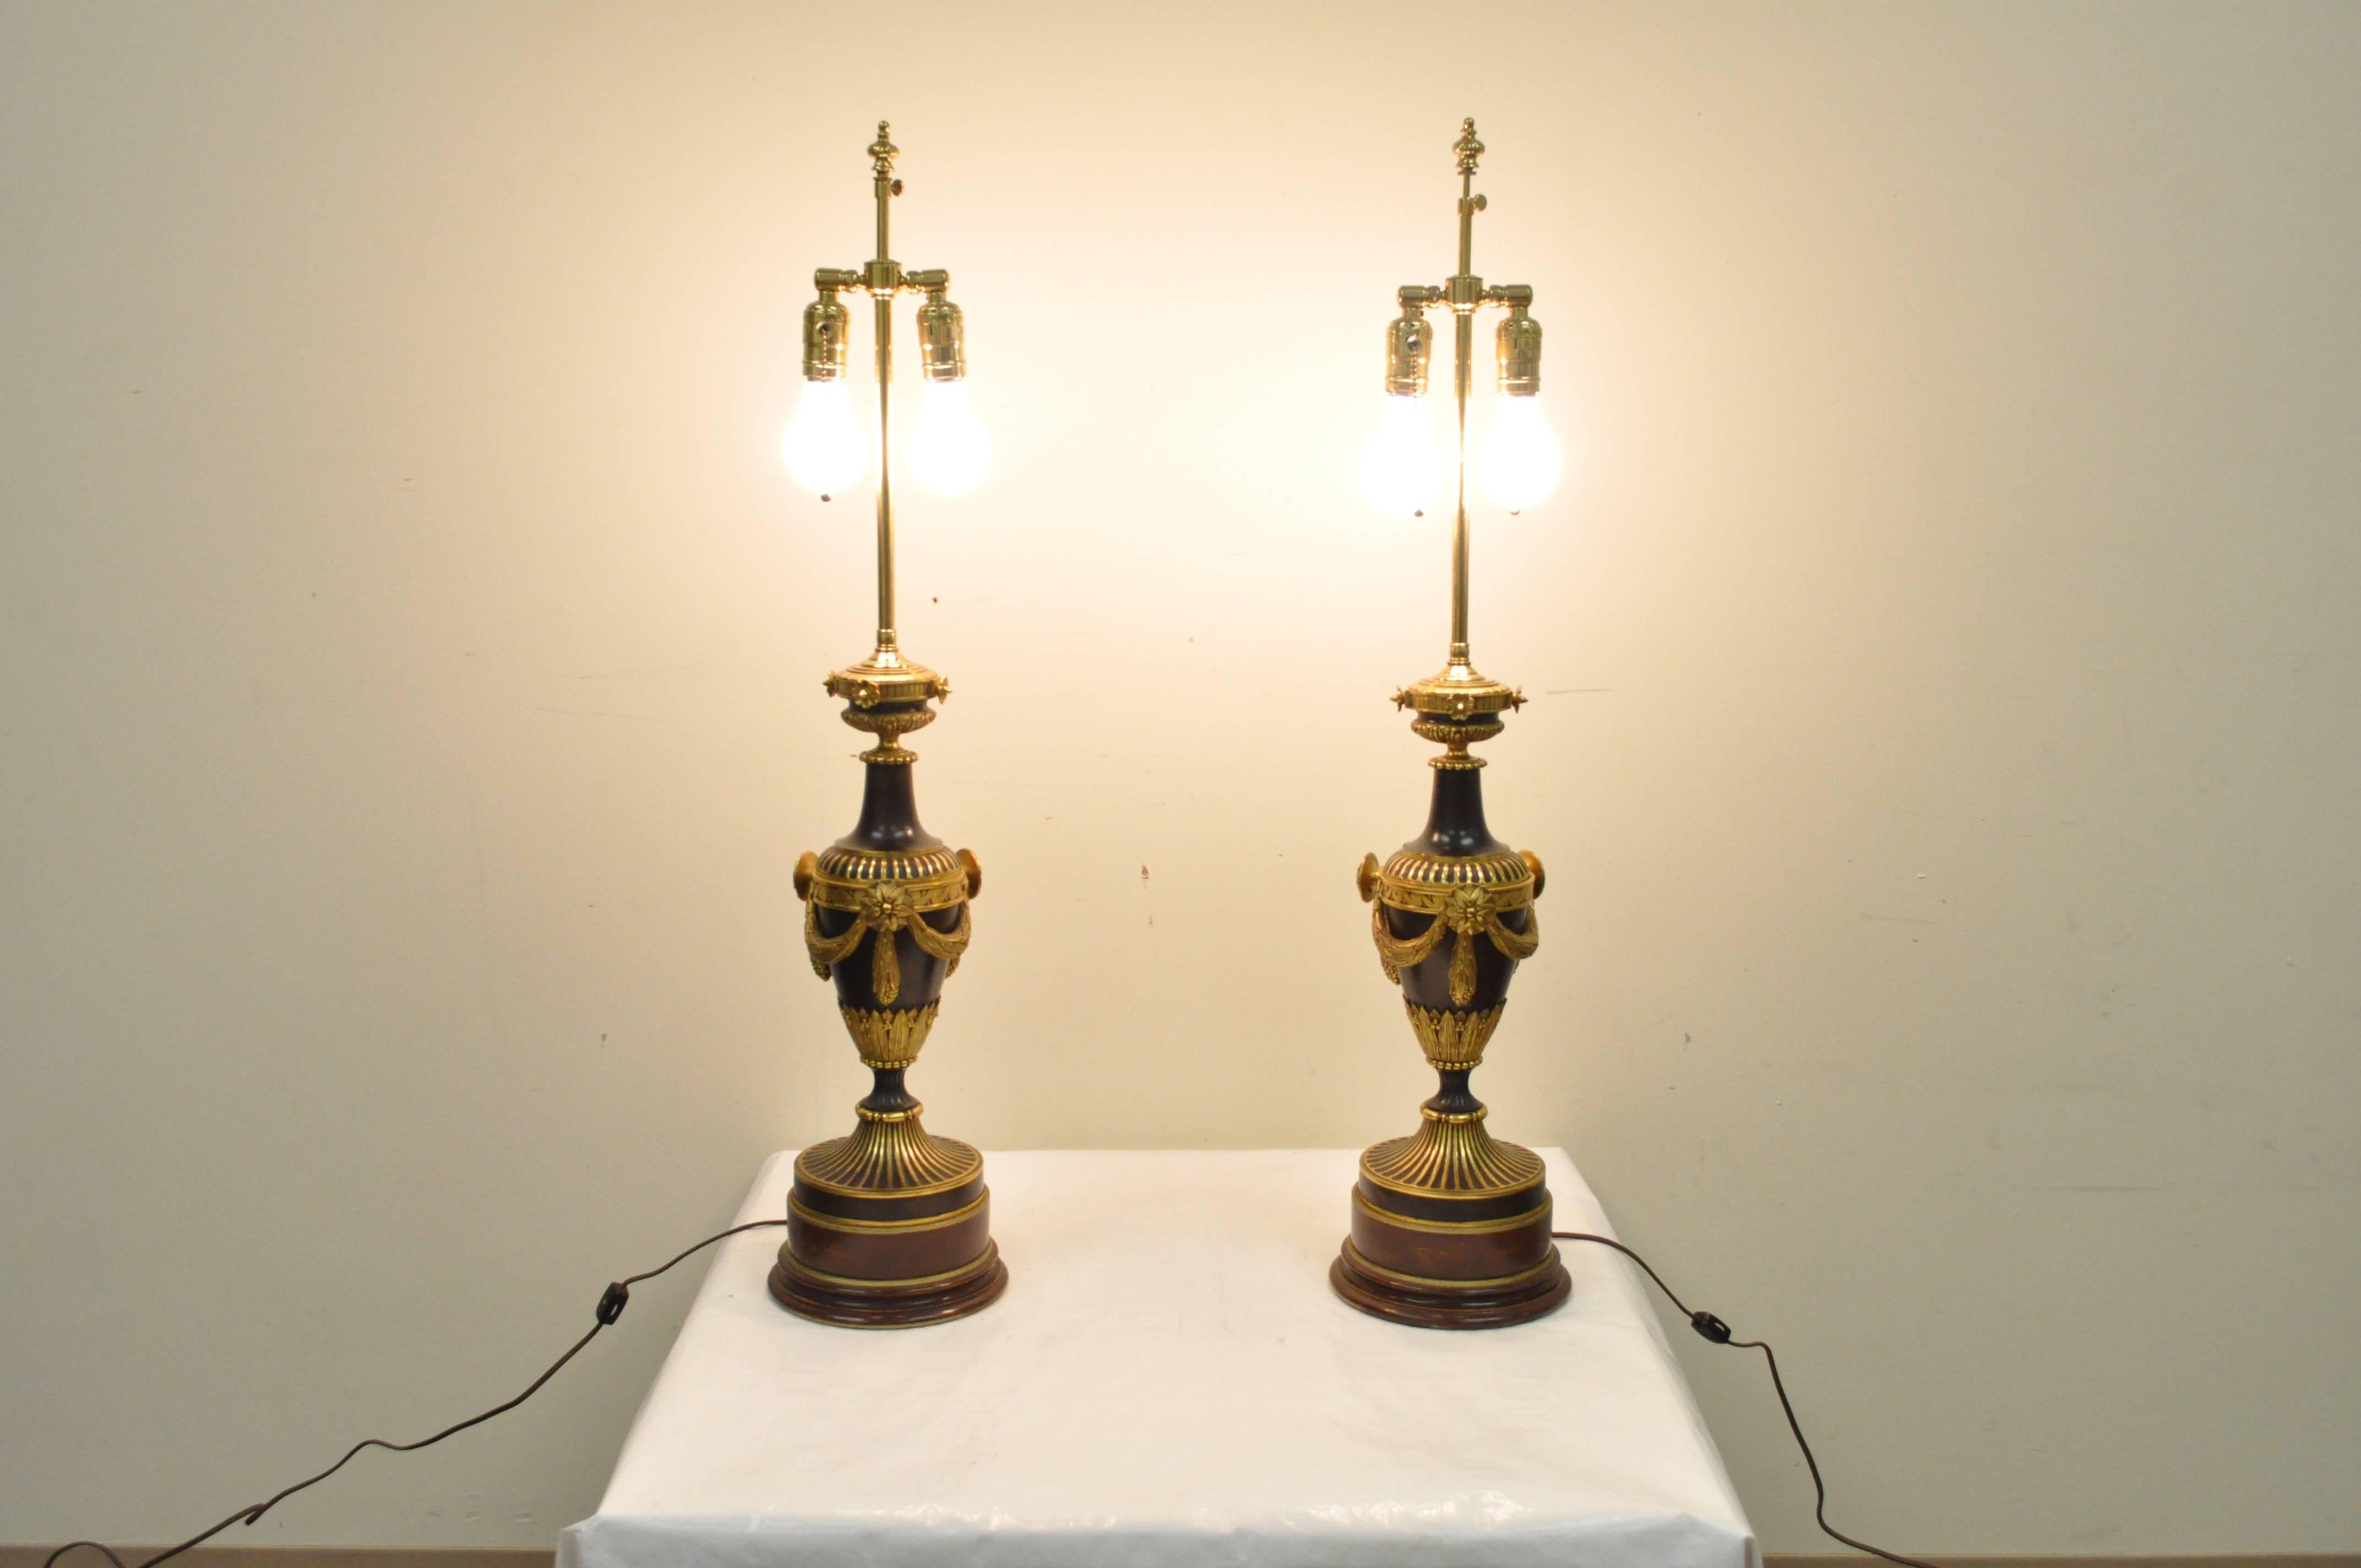 Pair of 19th Century Gilt Bronze French Neoclassical Empire Urn Form Table Lamps For Sale 1